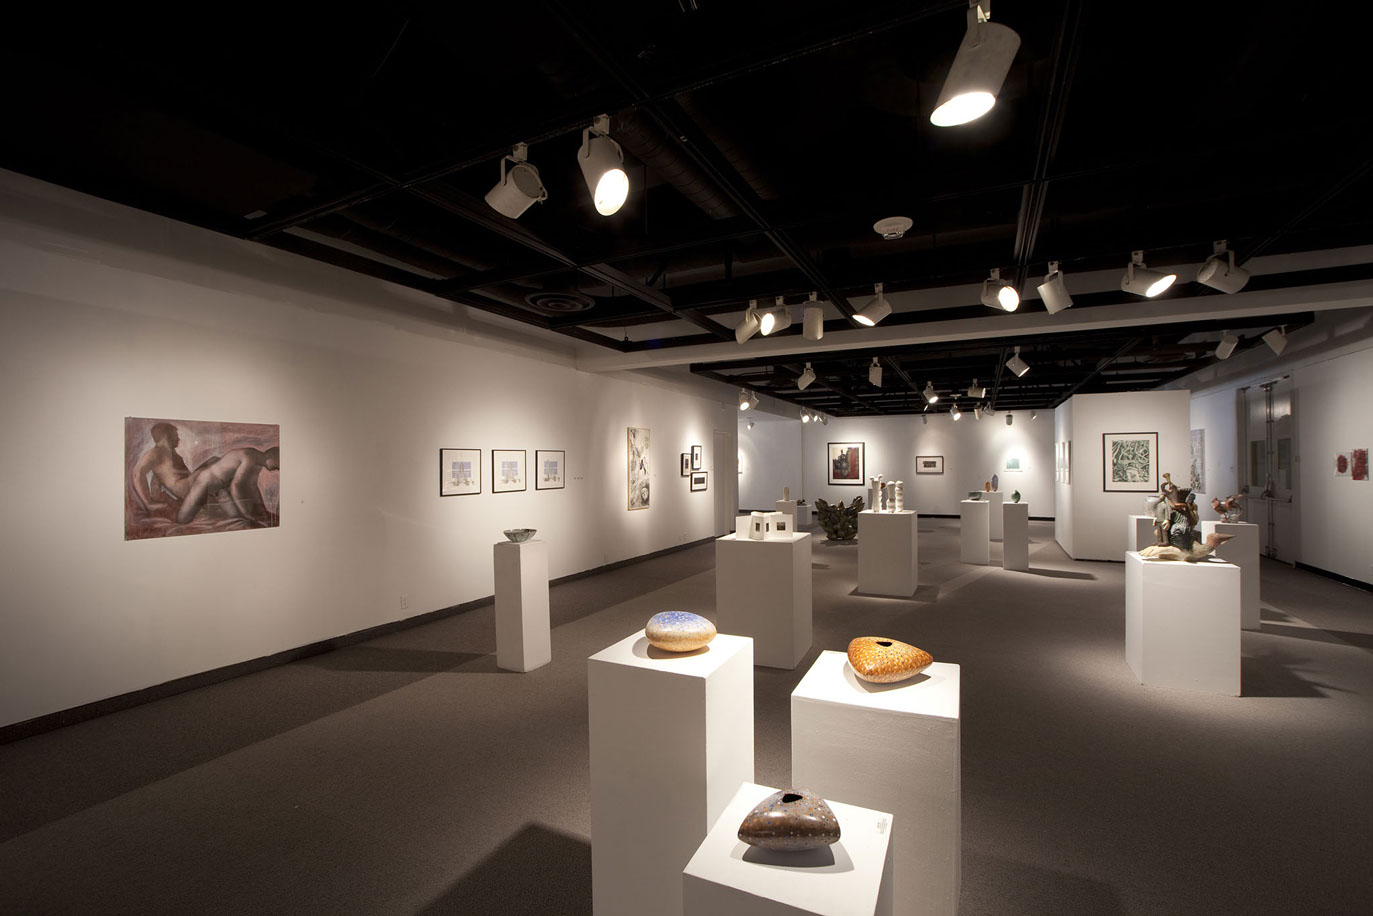 Installation View, Back of Gallery, Ink & Clay 38  Exhibition, Mar. 15, 2012 to Apr. 27, 2012.